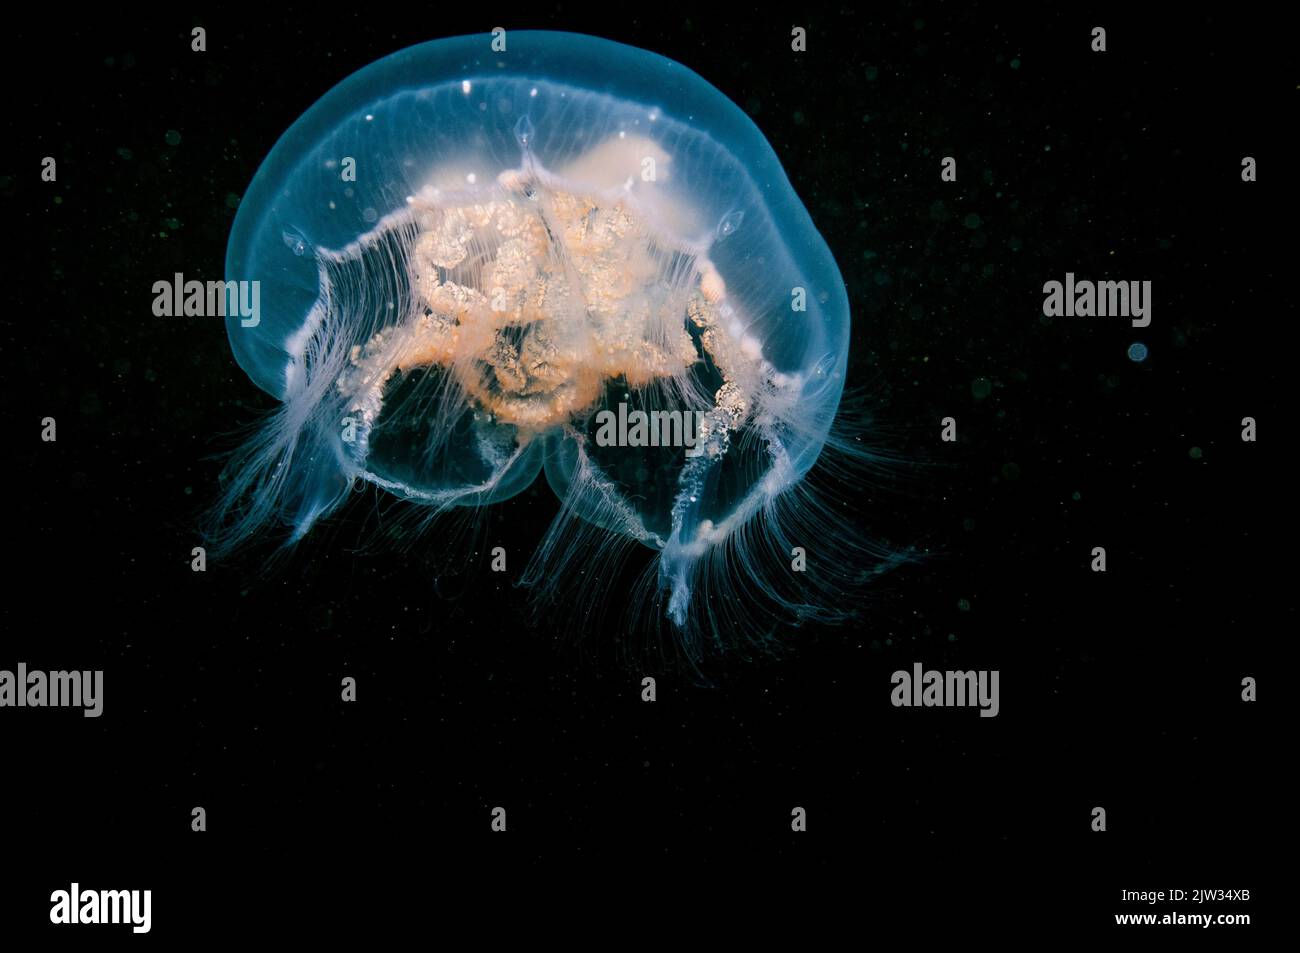 Moon Jellyfish drifting underwater in the St. Lawrence River in Canada. Stock Photo